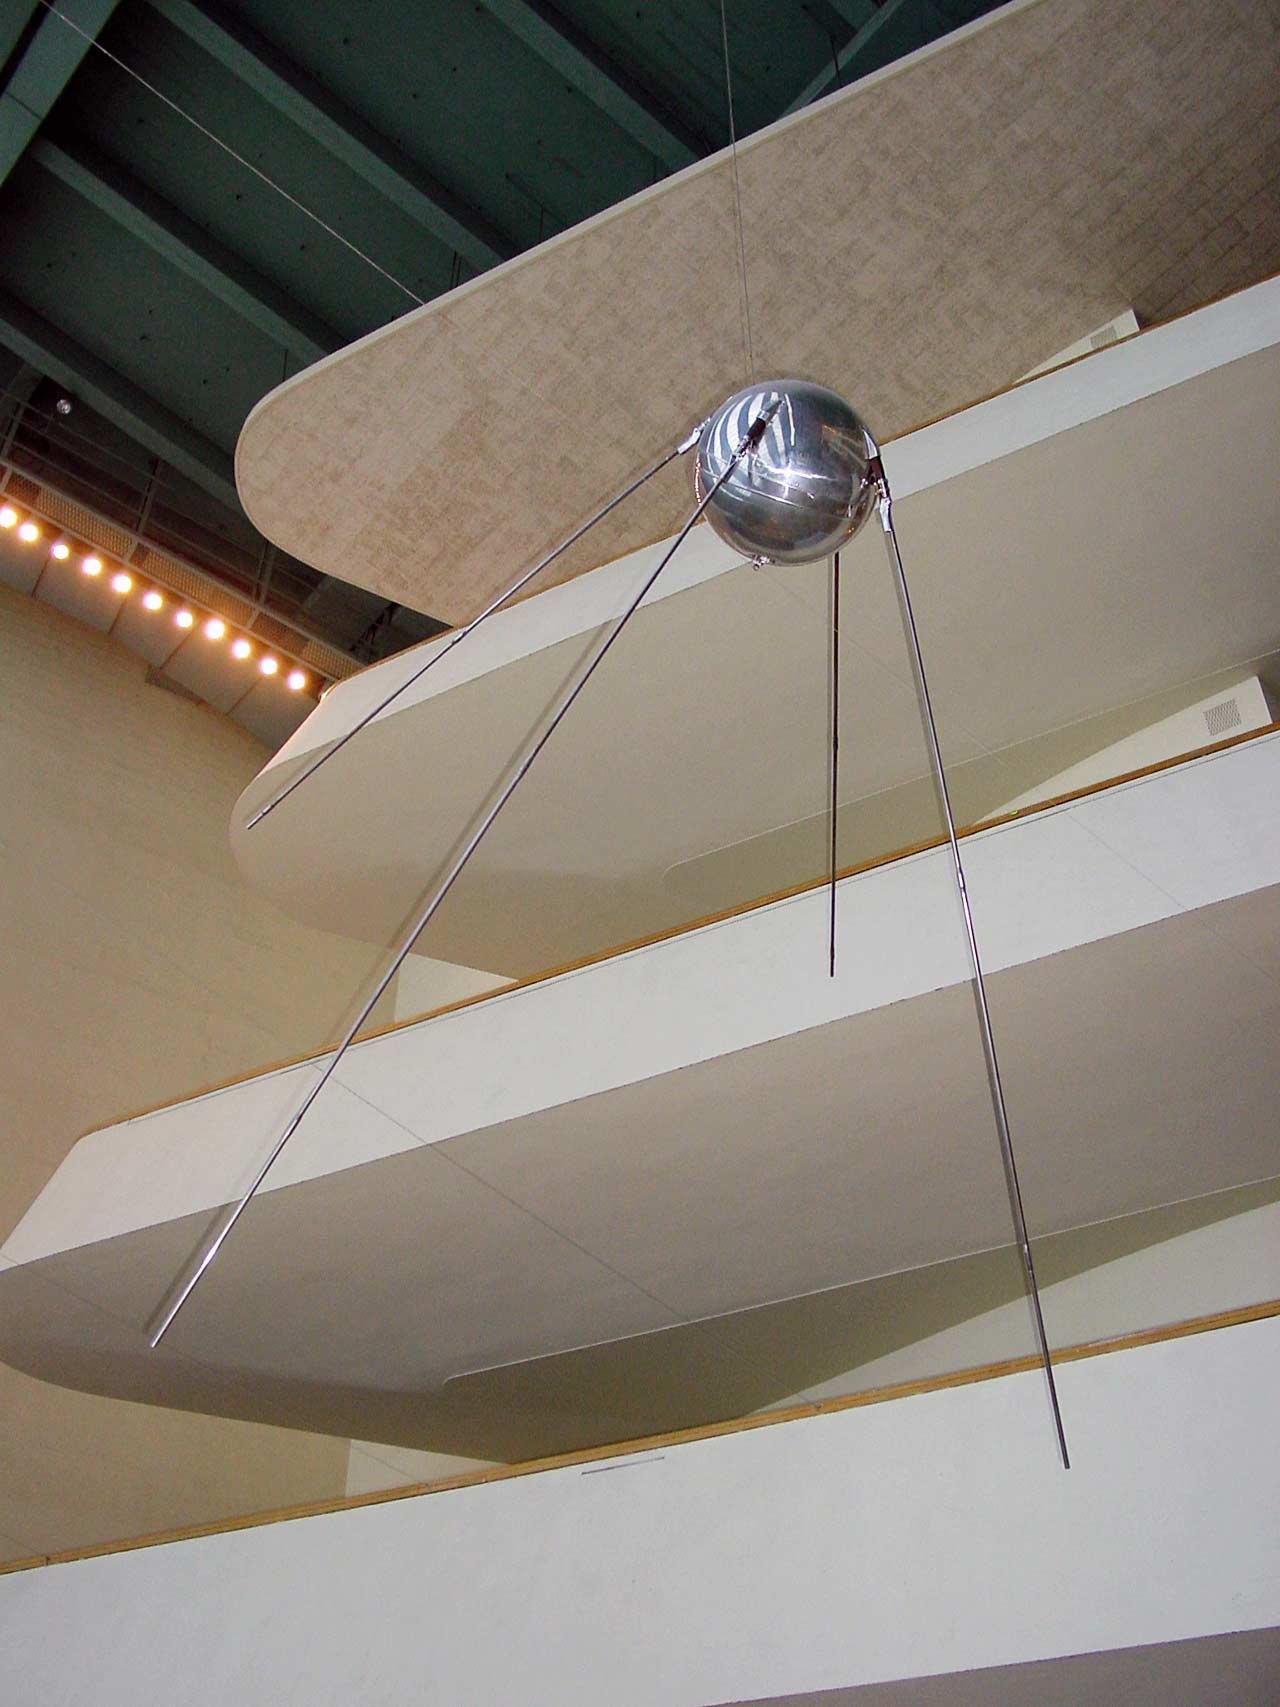 A model of Sputnik 1 hanging from the ceiling of the interior of the UN.